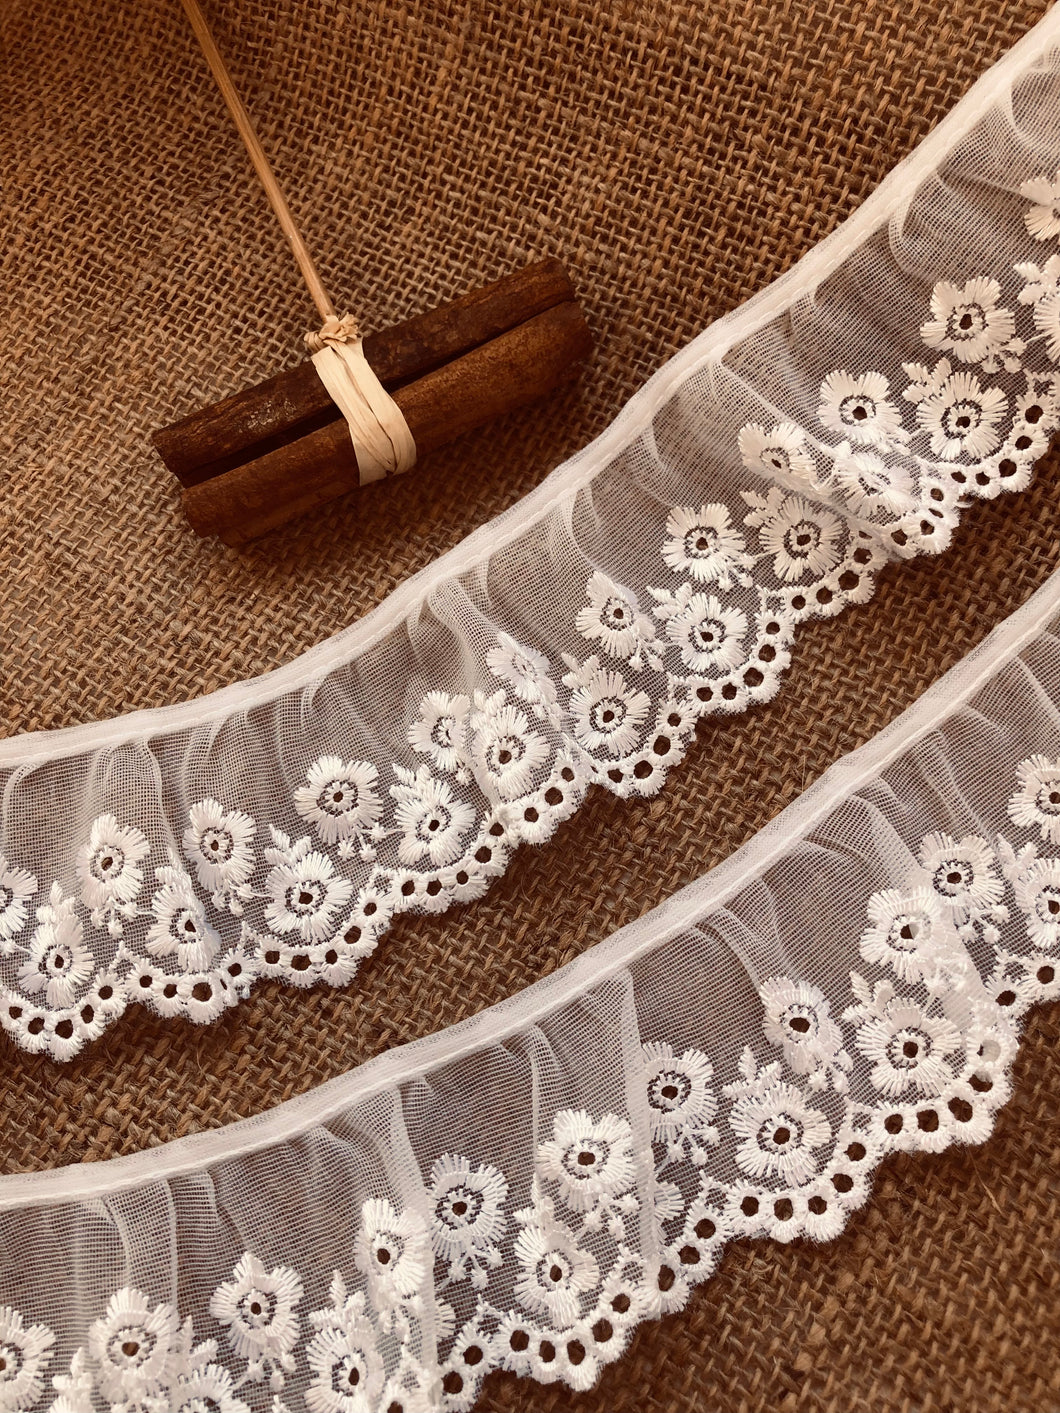 Ivory Voile Broderie Anglaise Embroidered Gathered Lace 5.5cm/2.25